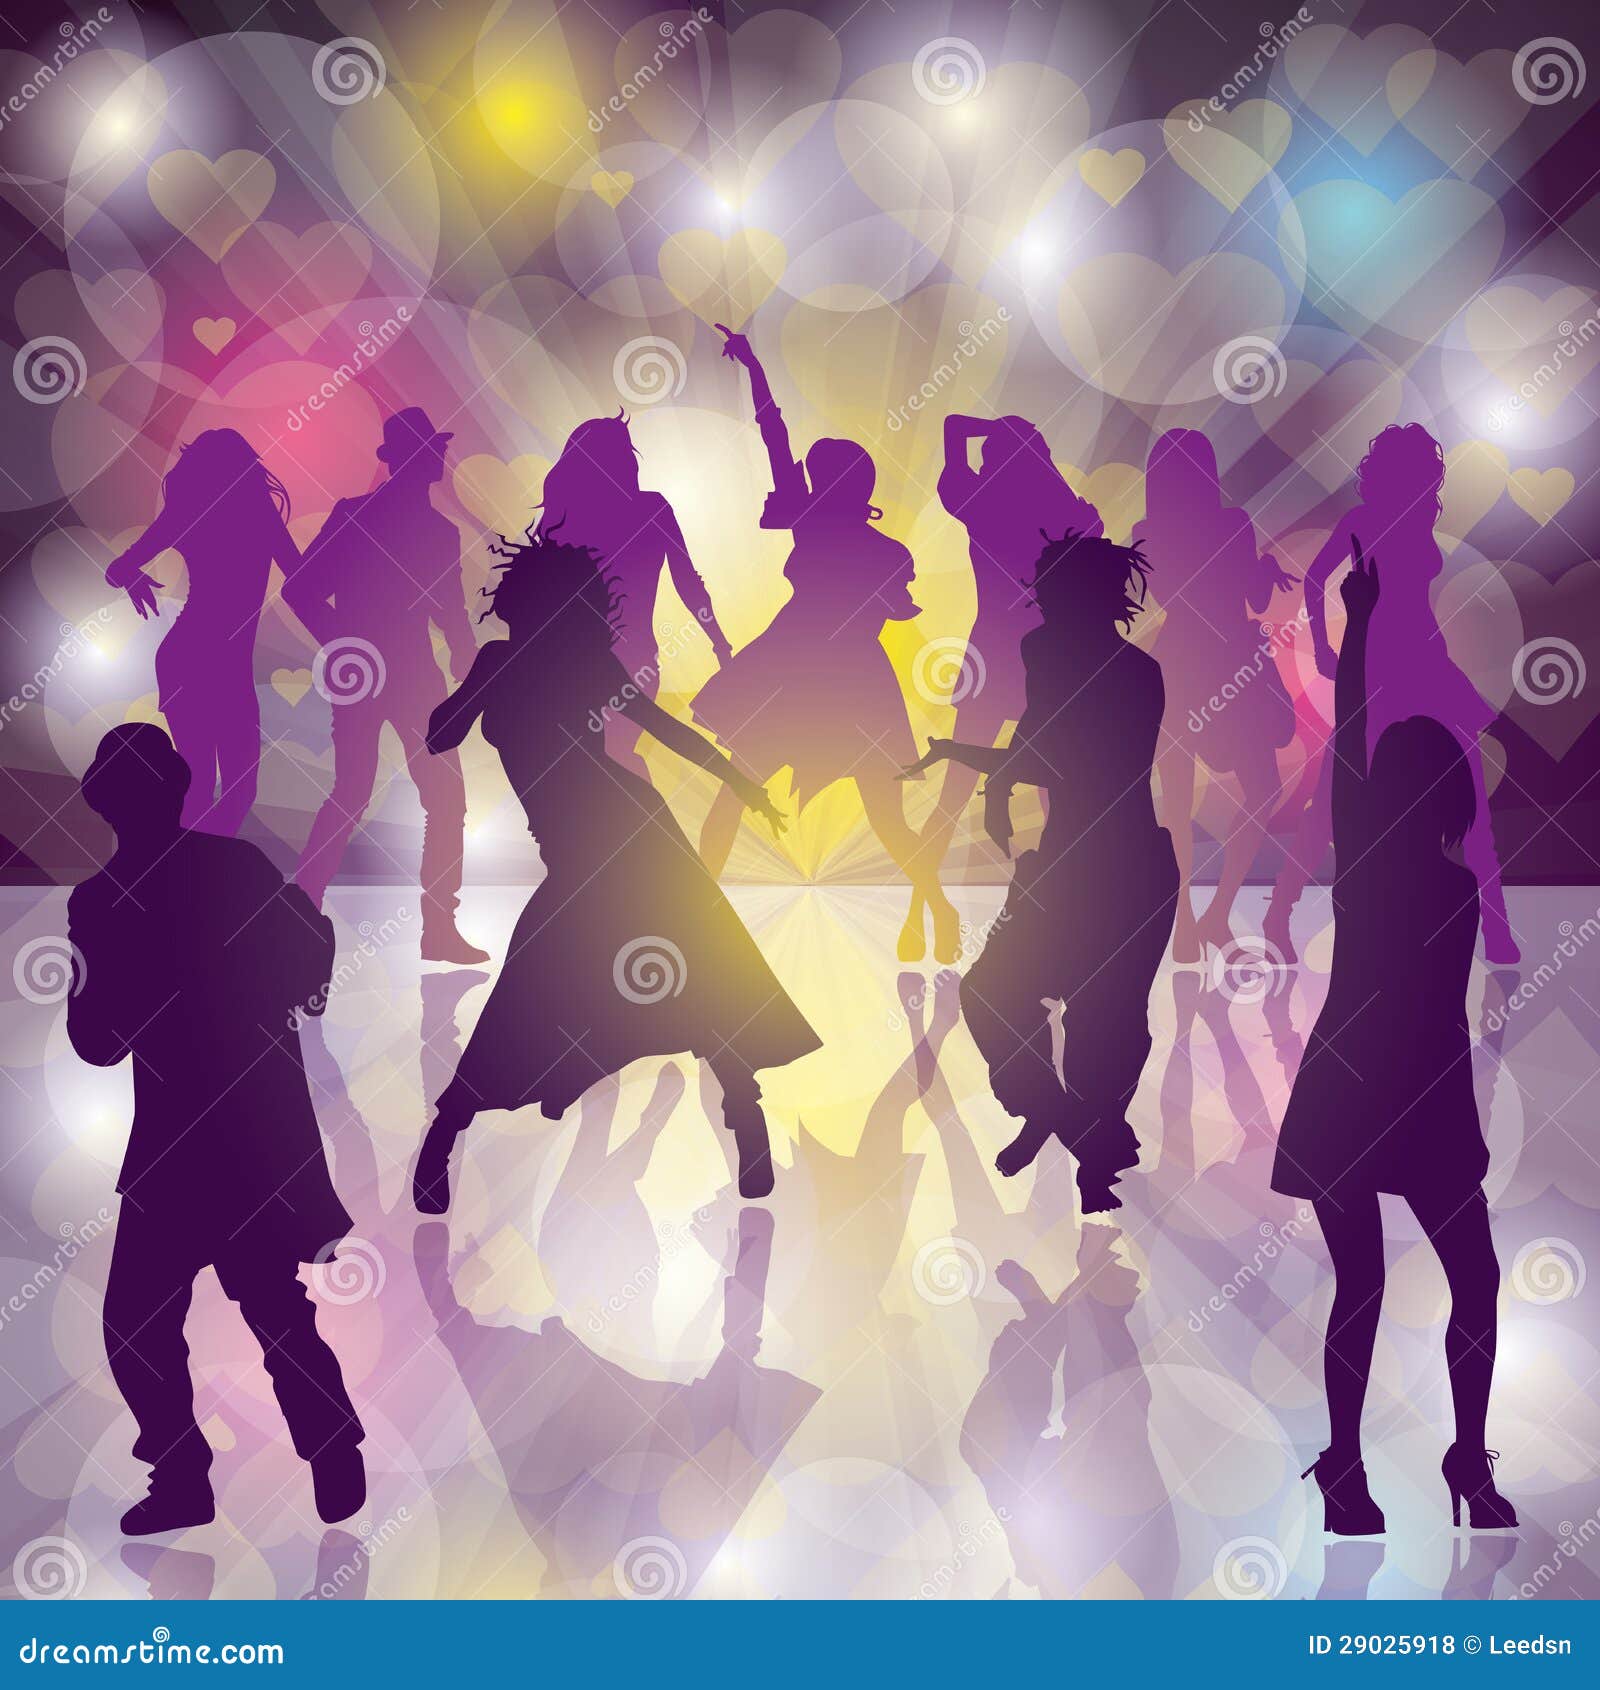 Dance Party Stock Vector Illustration Of Club Dancing 29025918 